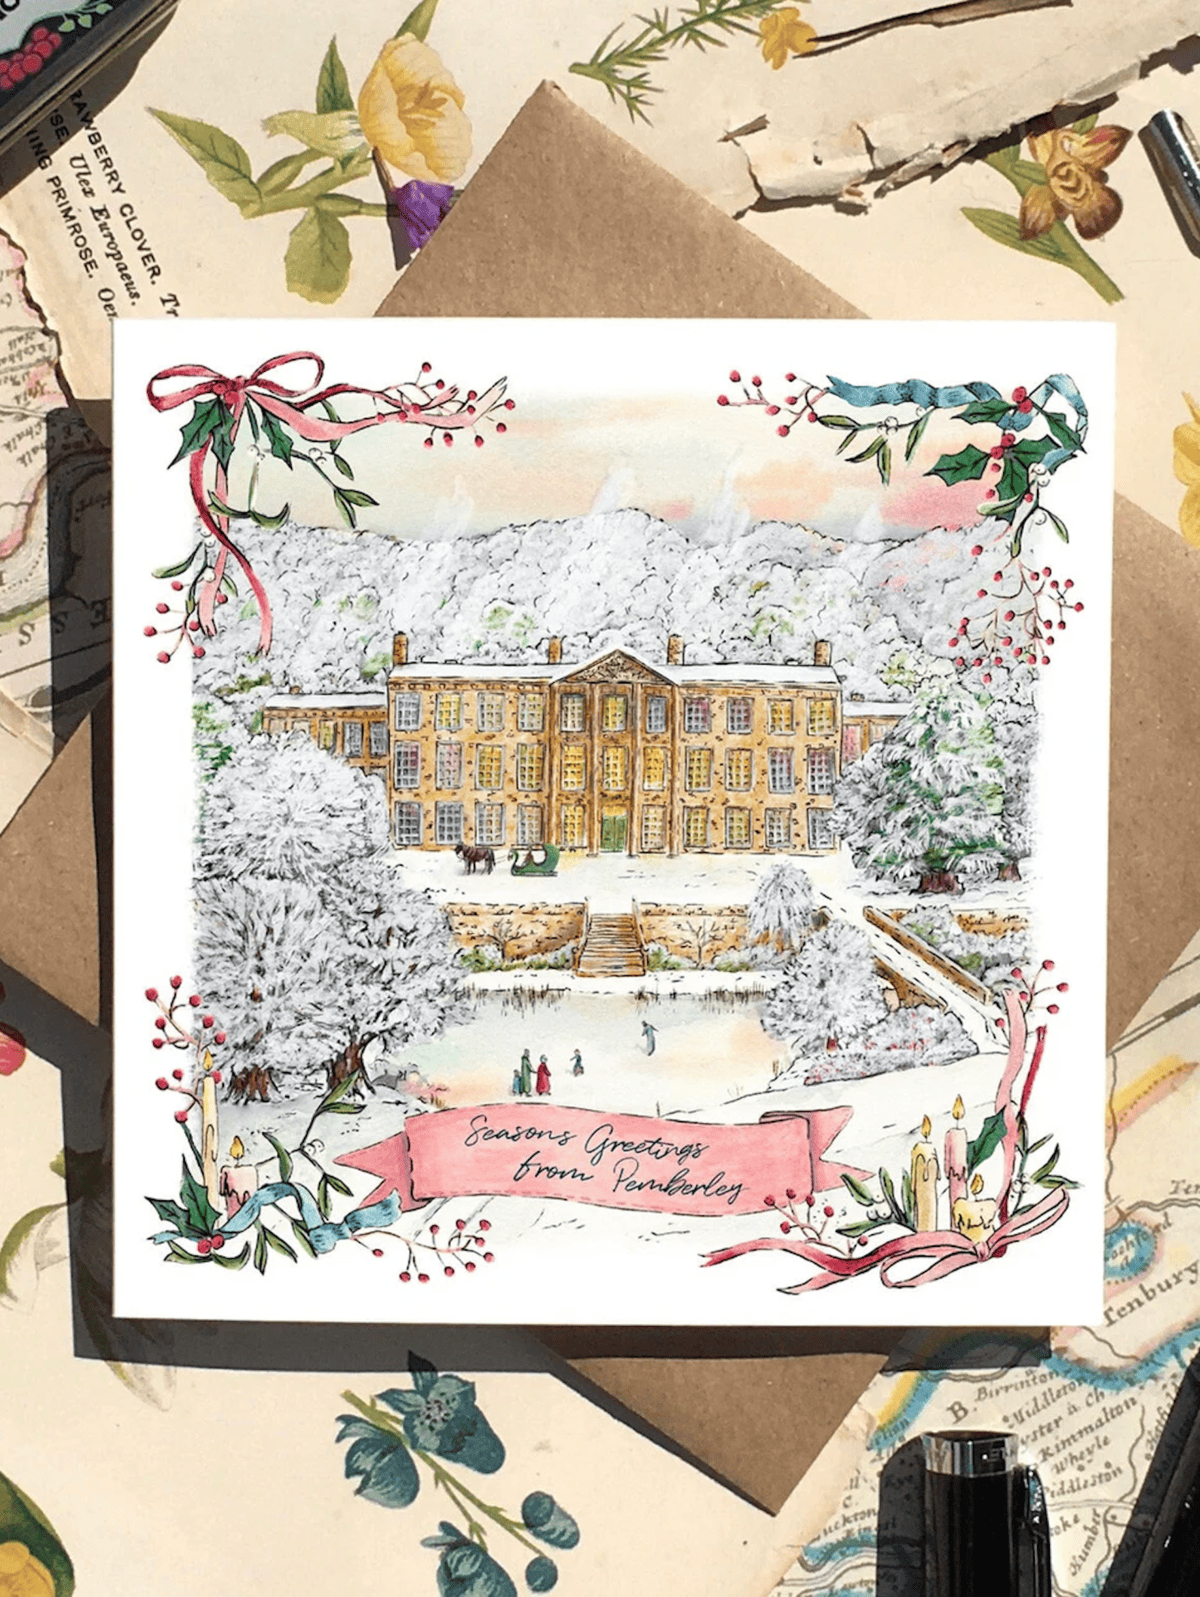 pemberley christmas card for fans of jane austen and pride and prejudice